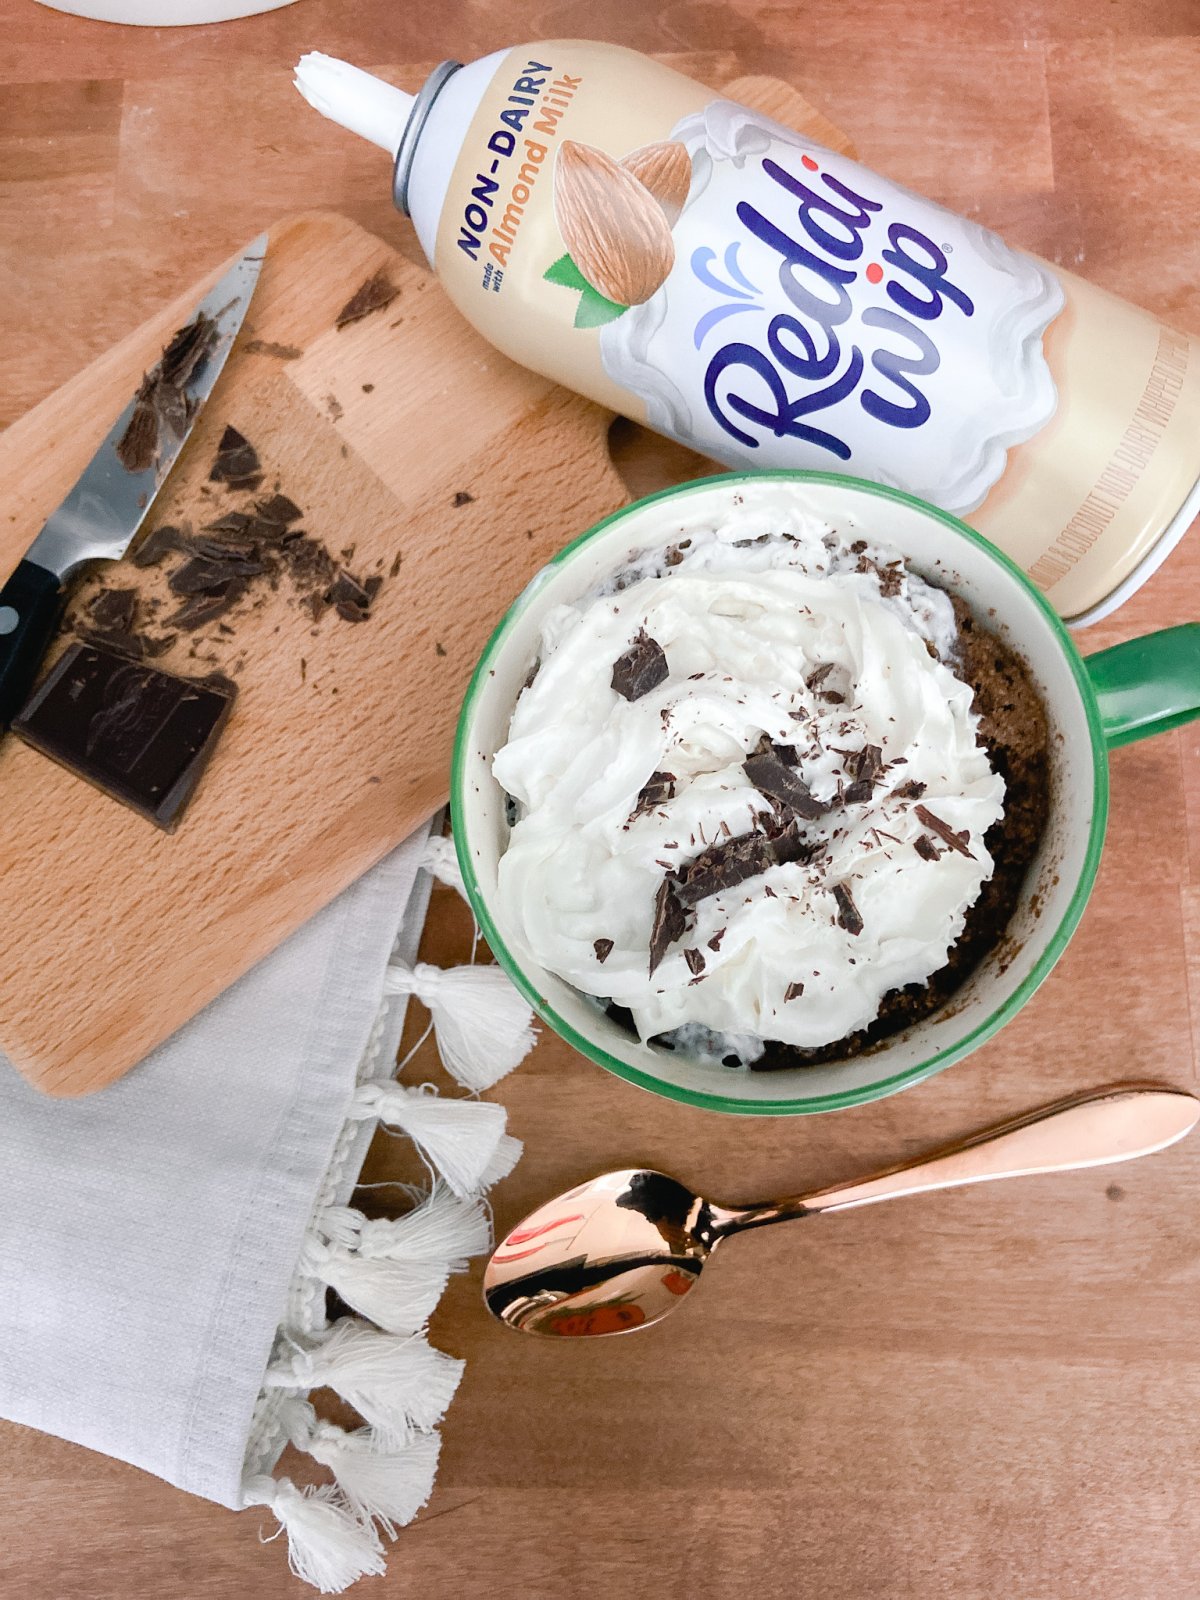 The Easiest 5-Minute Low-Carb Keto Chocolate Mug Cake! Need a sweet treat but want to stay on track? Make this easy cake for one!